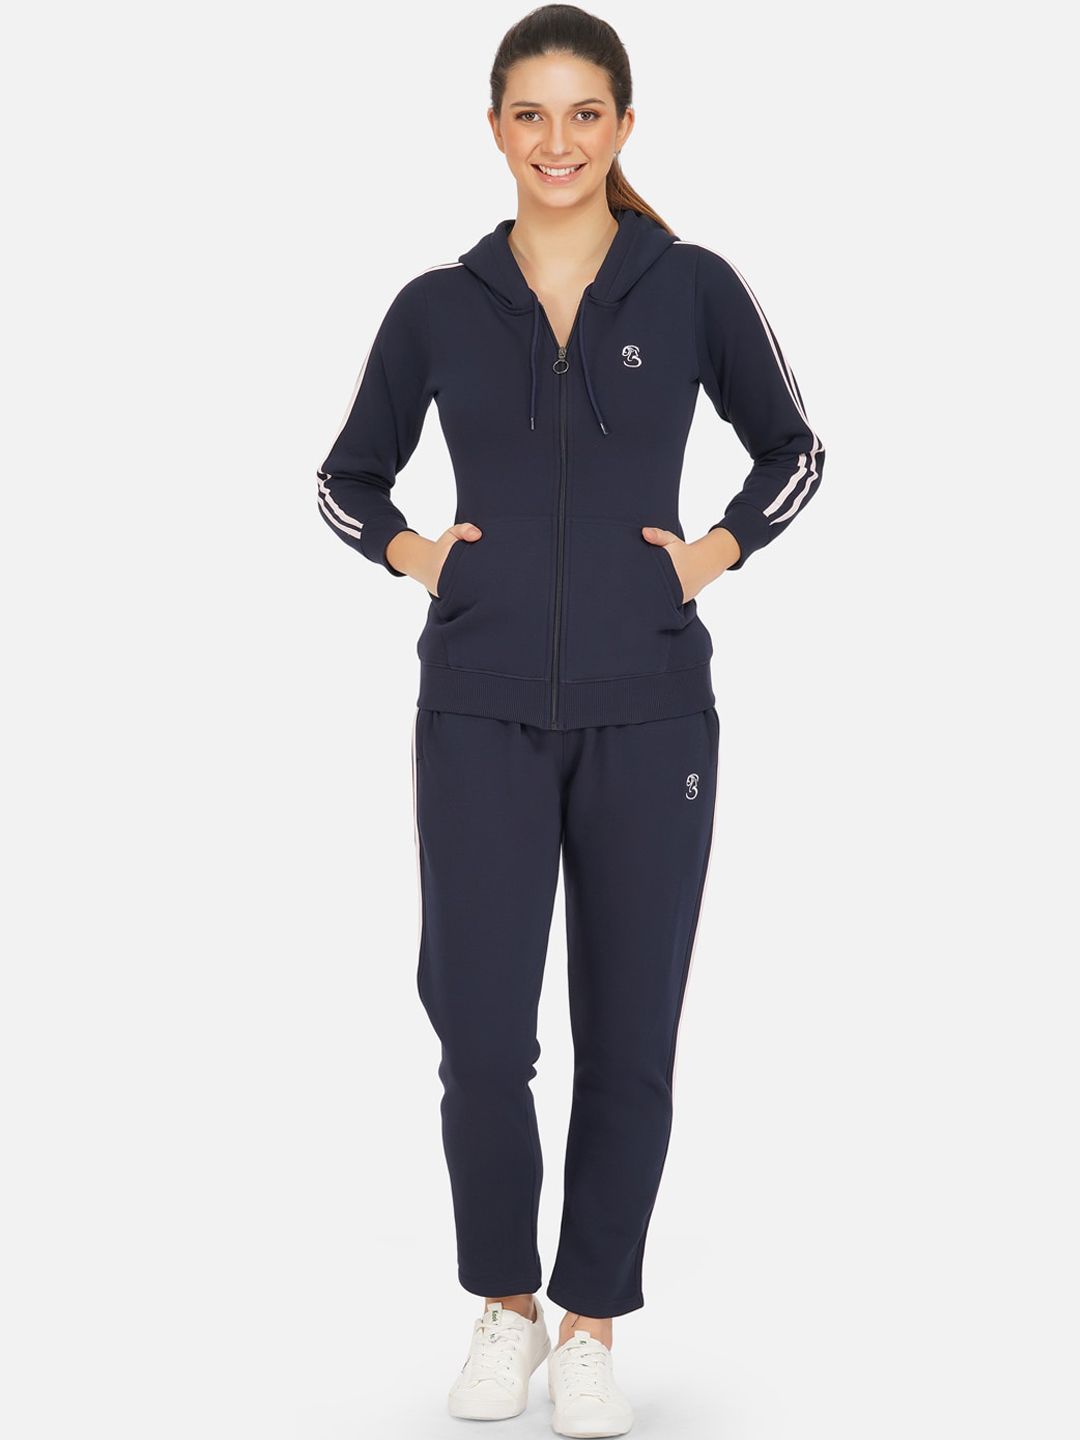 FABNEST Women Navy Blue & White Solid Tracksuits Price in India